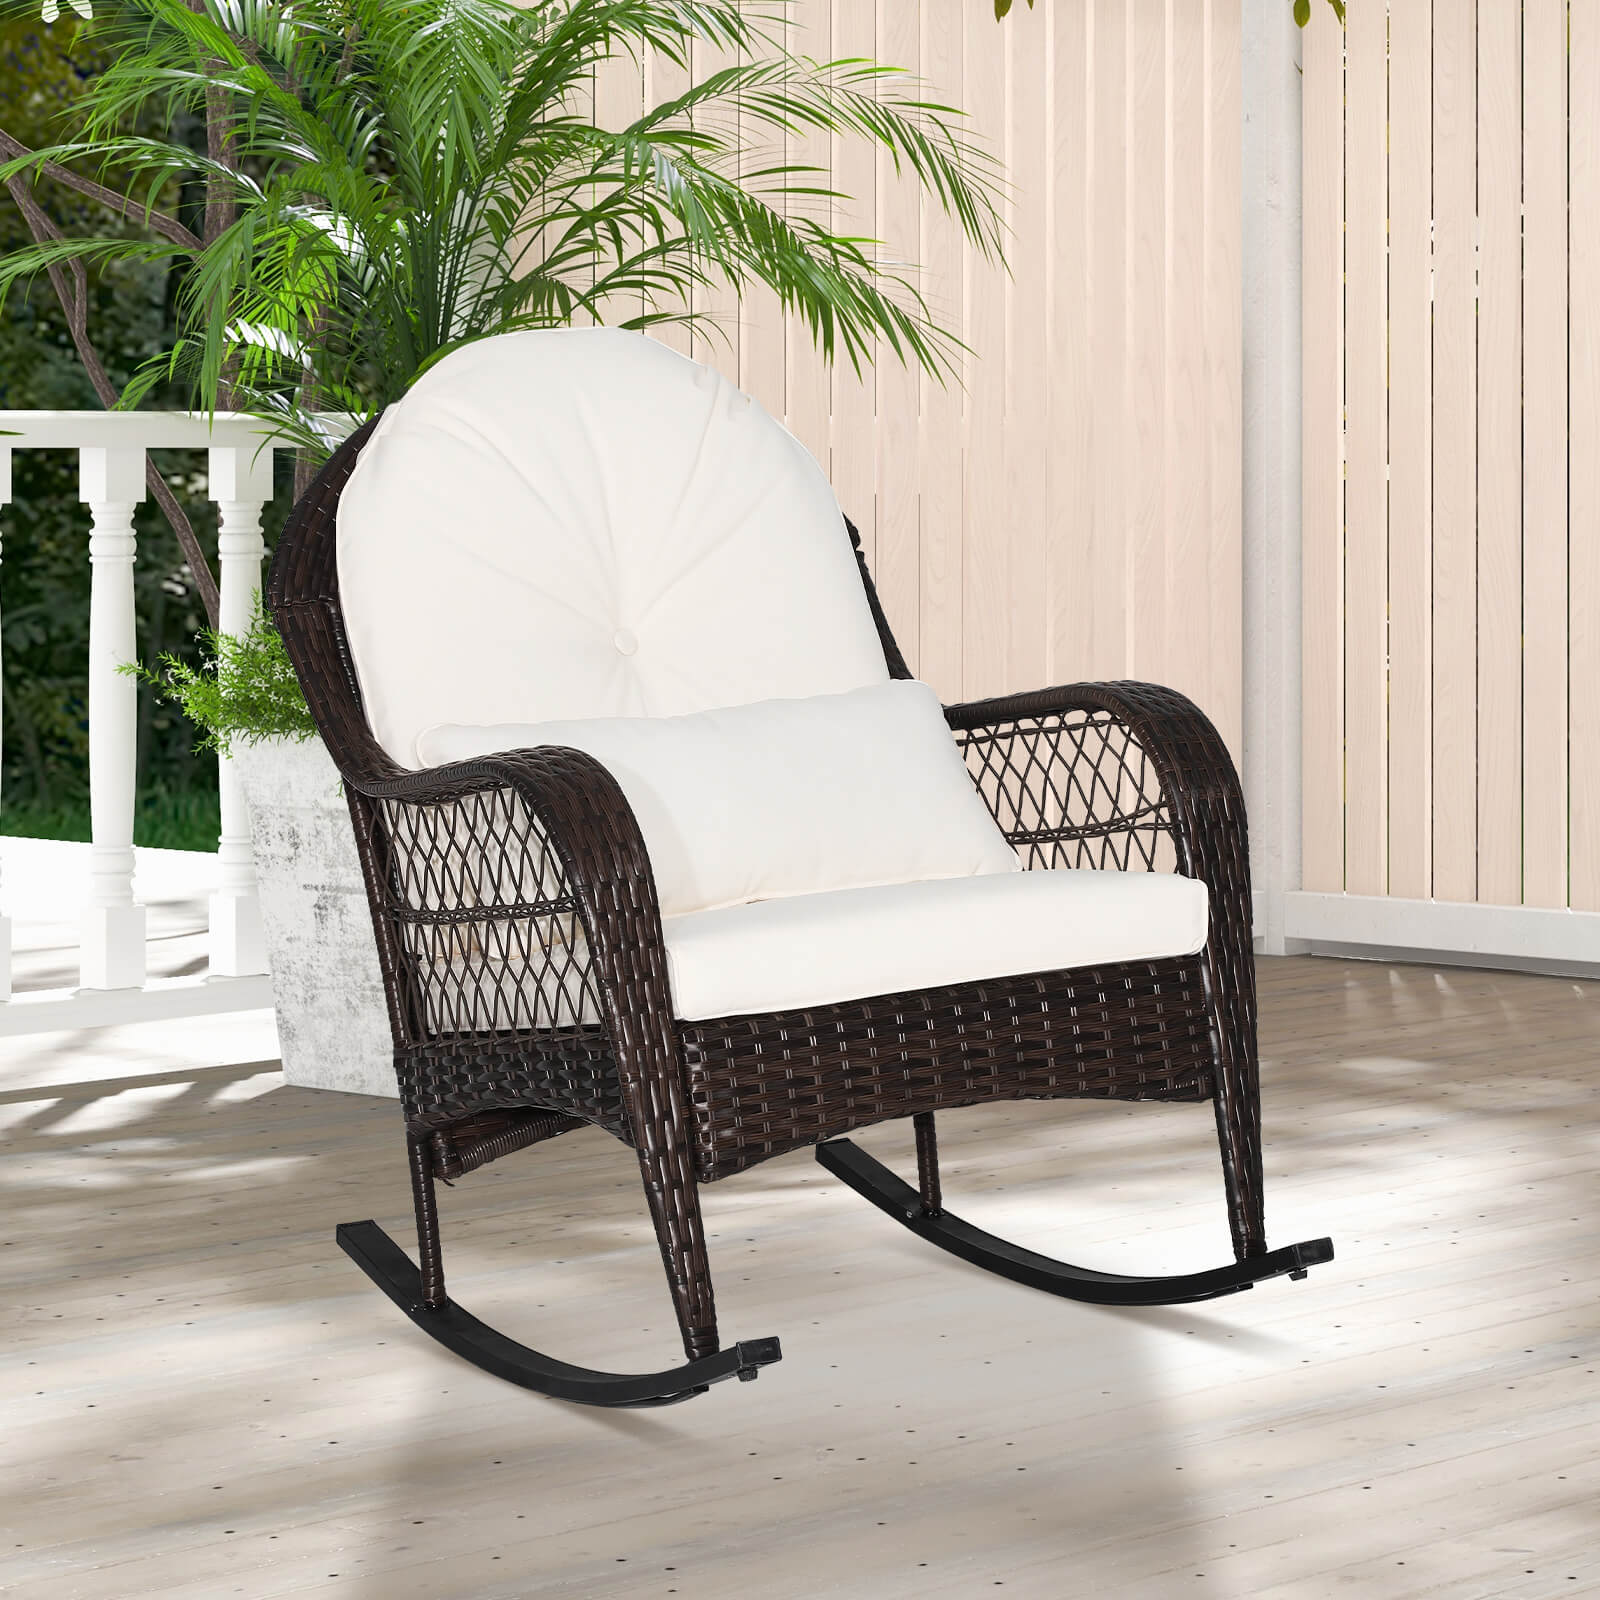 Rocking_Chair_for_Patio-1-1.jpg